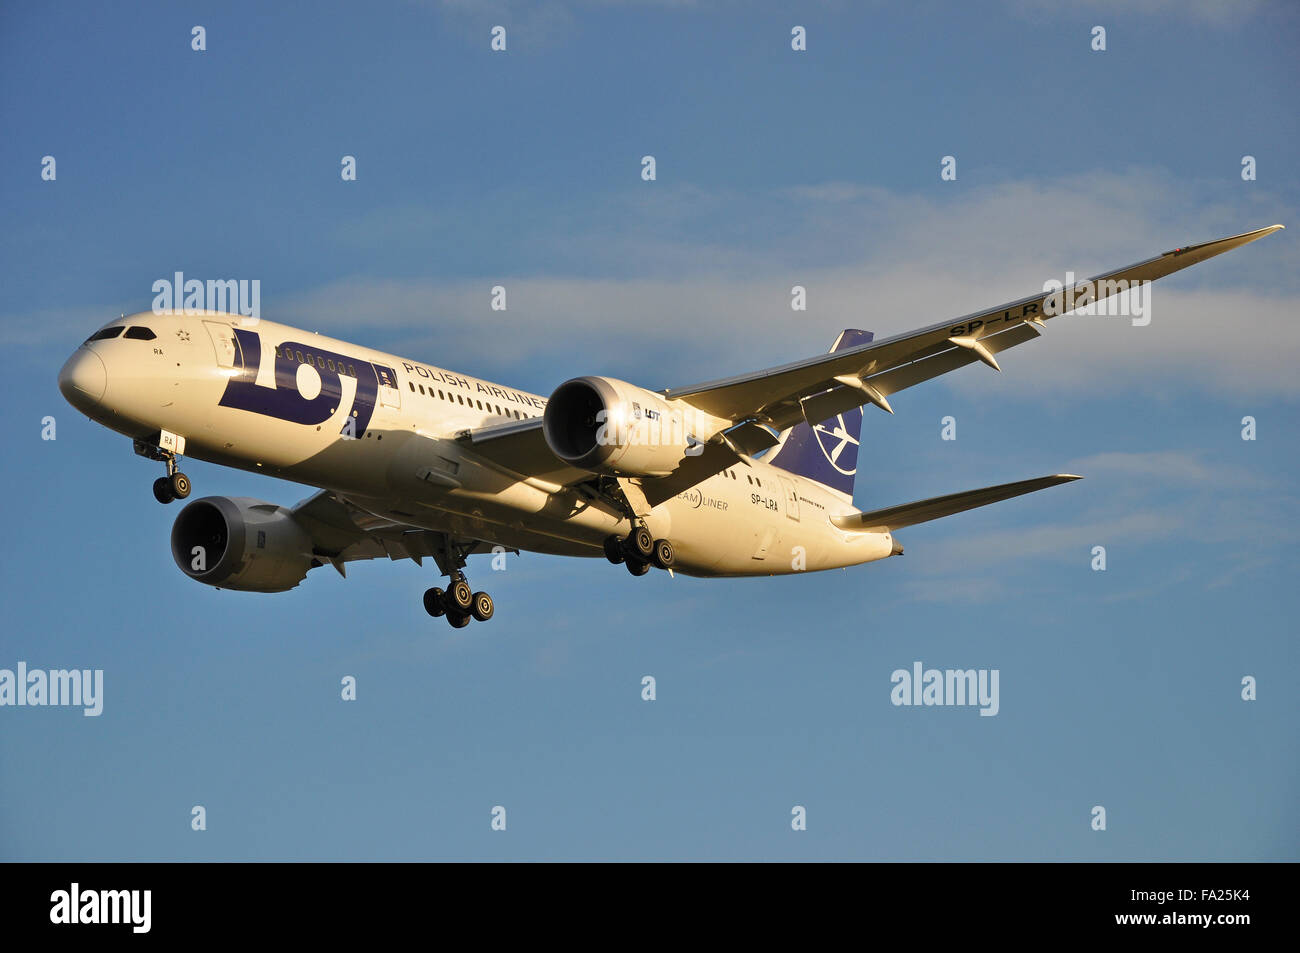 LOT - Polish Airlines Boeing 787-8 Dreamliner jet plane airliner - SP-LRA landing at London Heathrow Airport, UK in blue sky. Space for copy Stock Photo